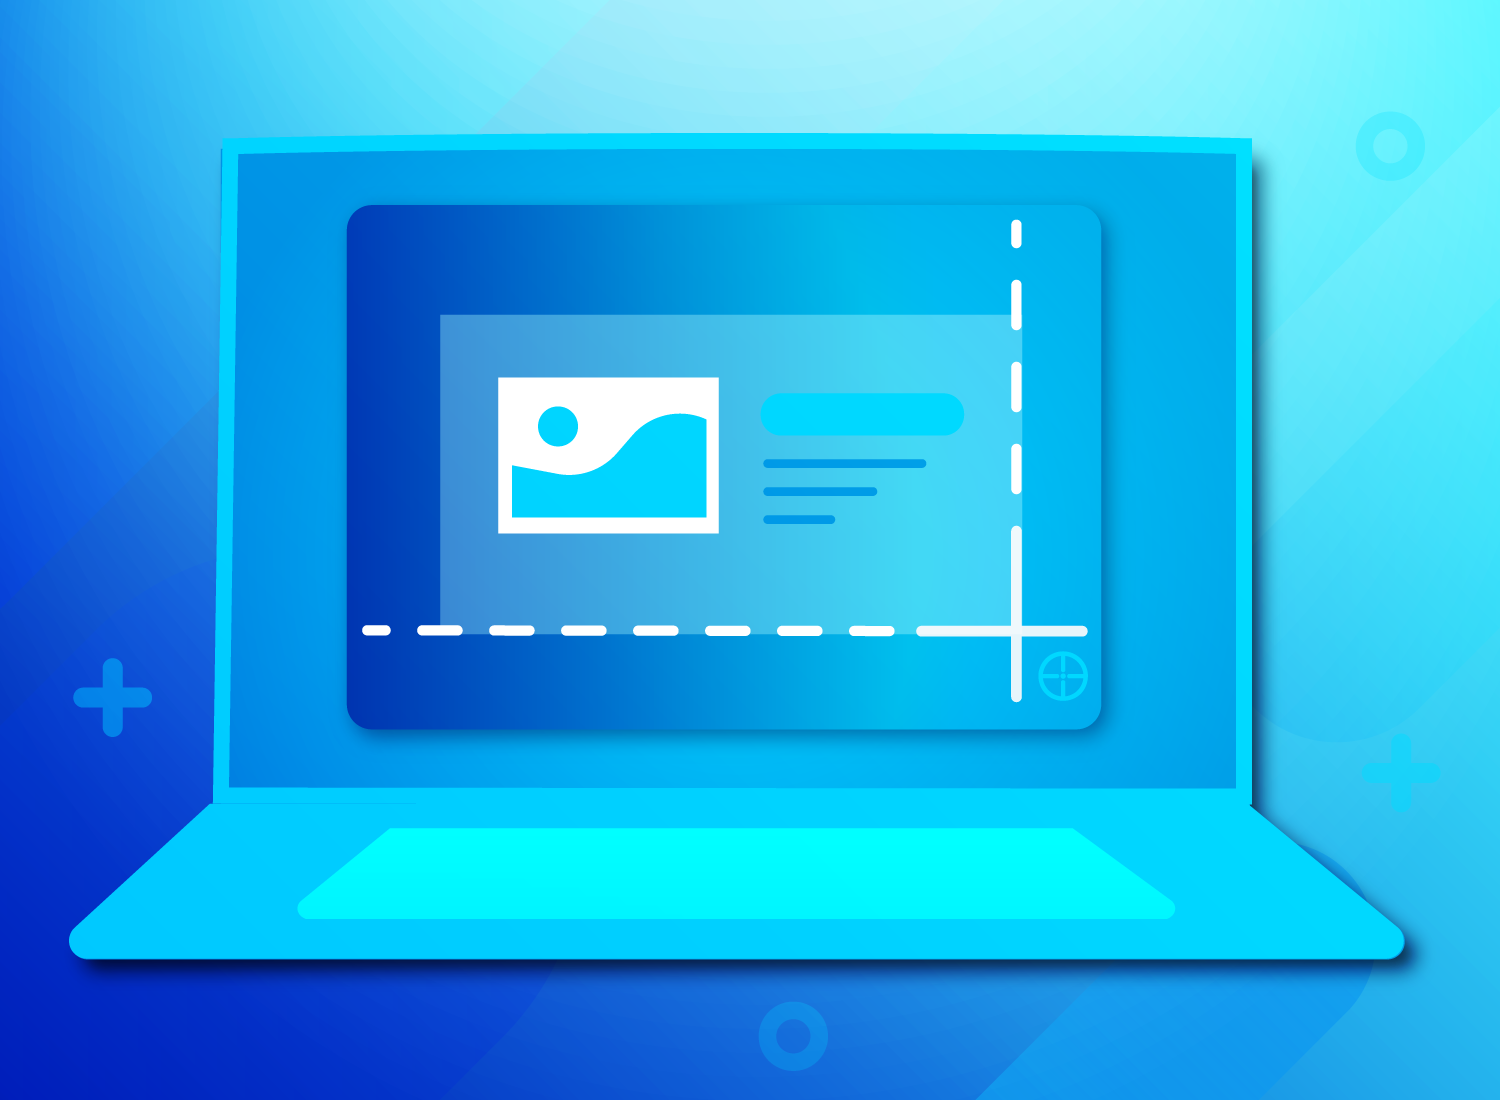 Digital illustration of a laptop with a screenshot editing interface on the screen, set against a gradient background. A cursor icon implies user interaction for editing or annotating a screenshot.